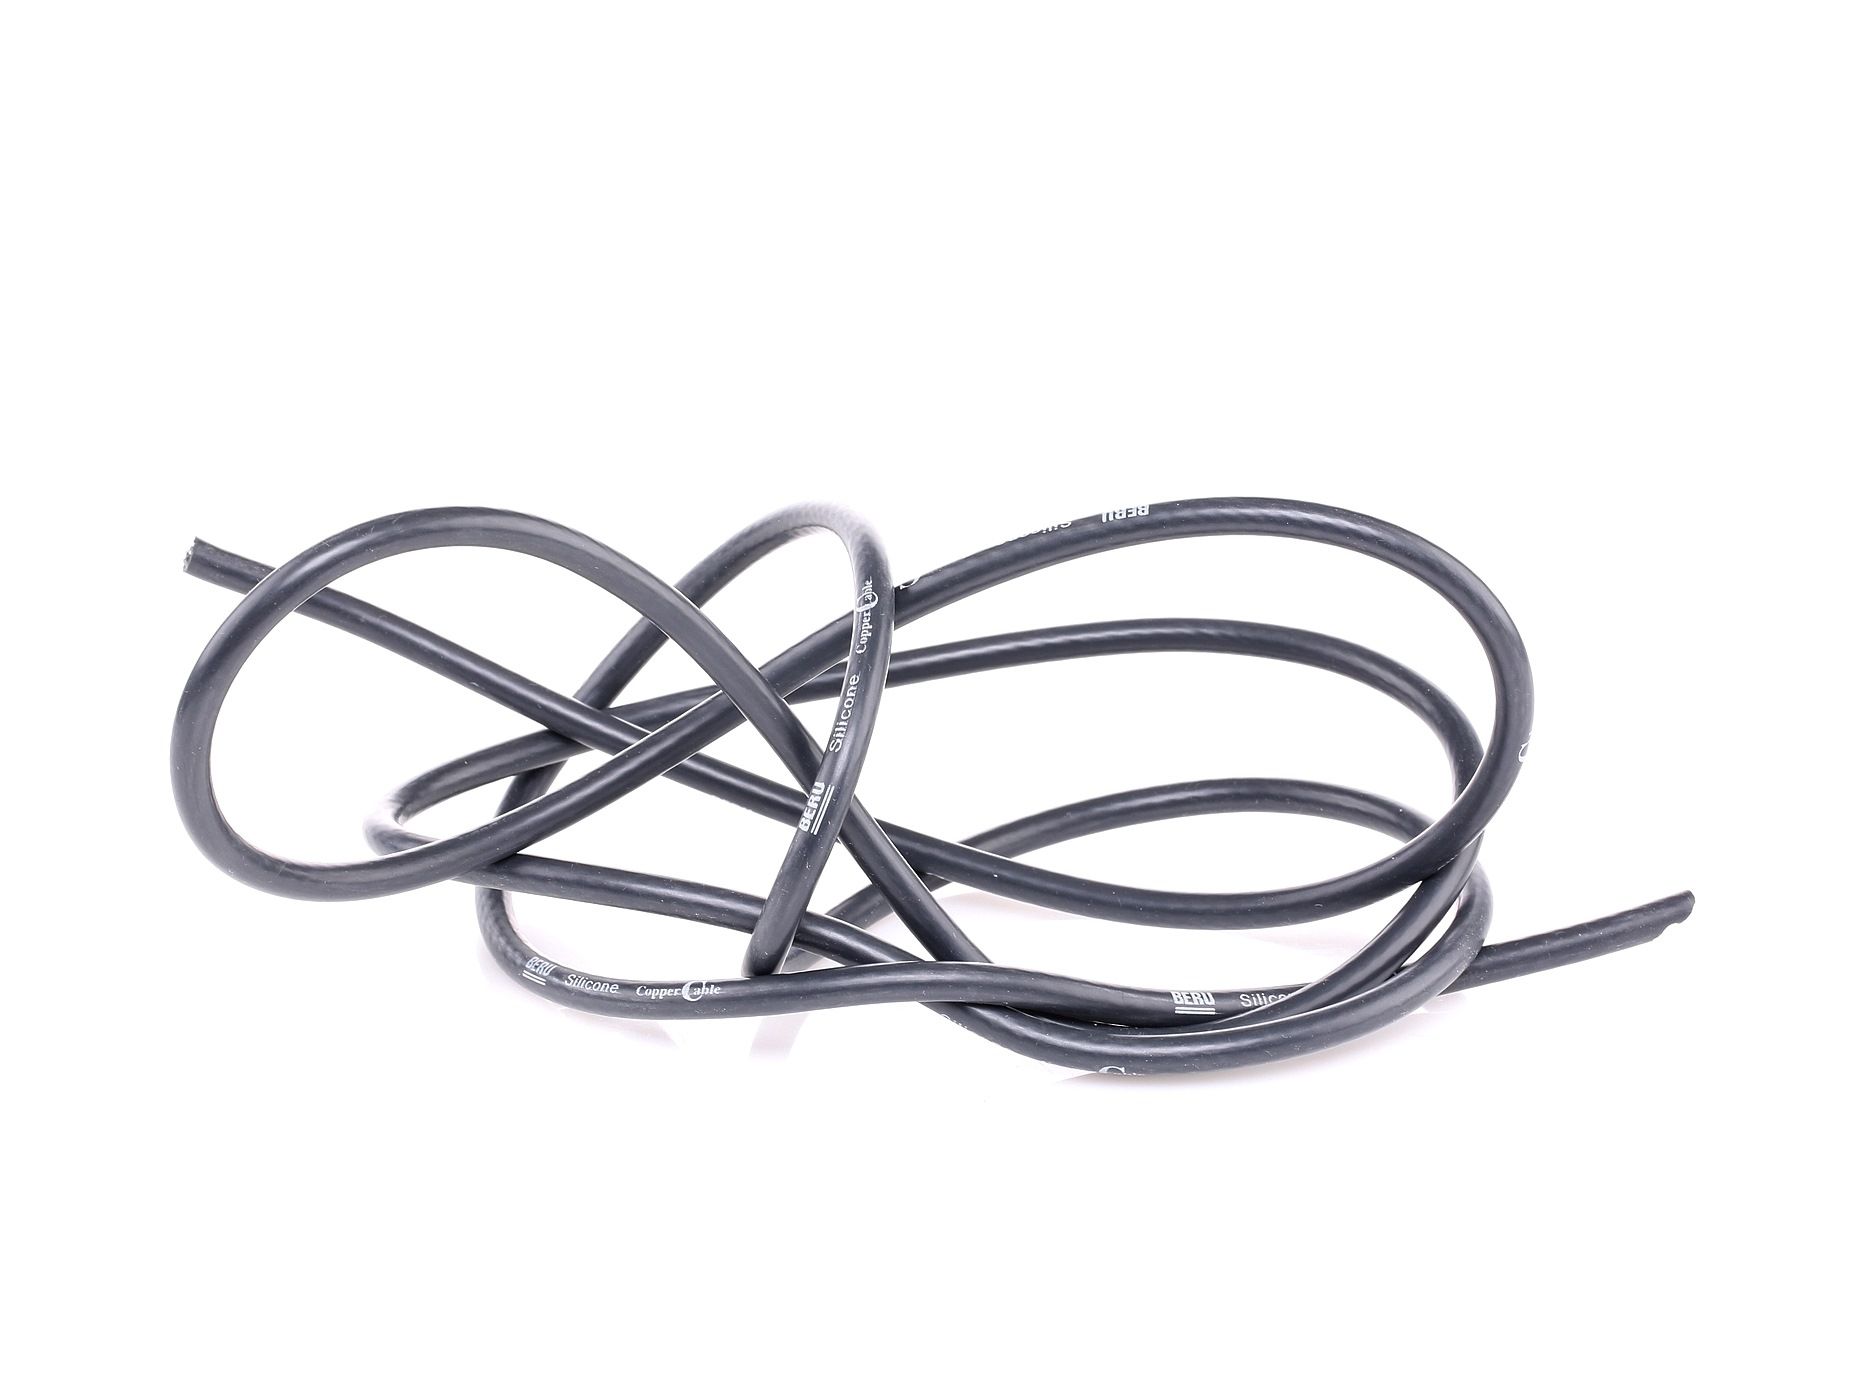 Image of BERU Ignition Lead 7MMSBLACK 12121360154,0300800023,7mmSiliconschwarz Ignition Cable